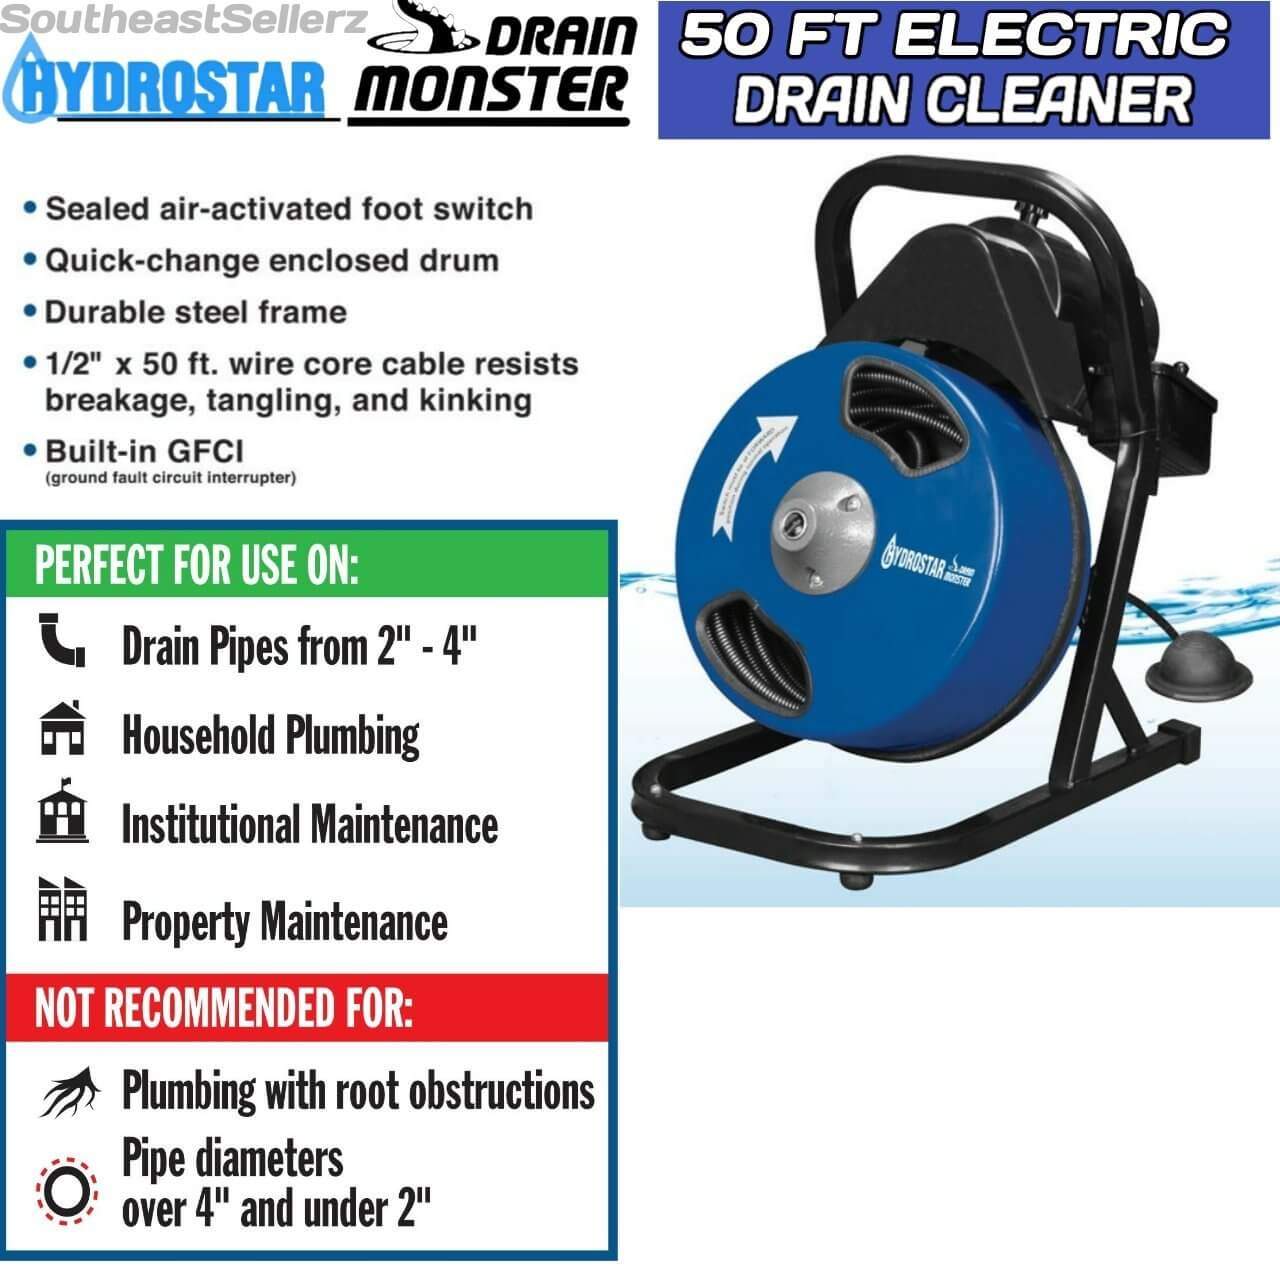 Hydrostar 1-2 inch by 50 feet Compact Electric Drain Cleaner Drum Auger Snake